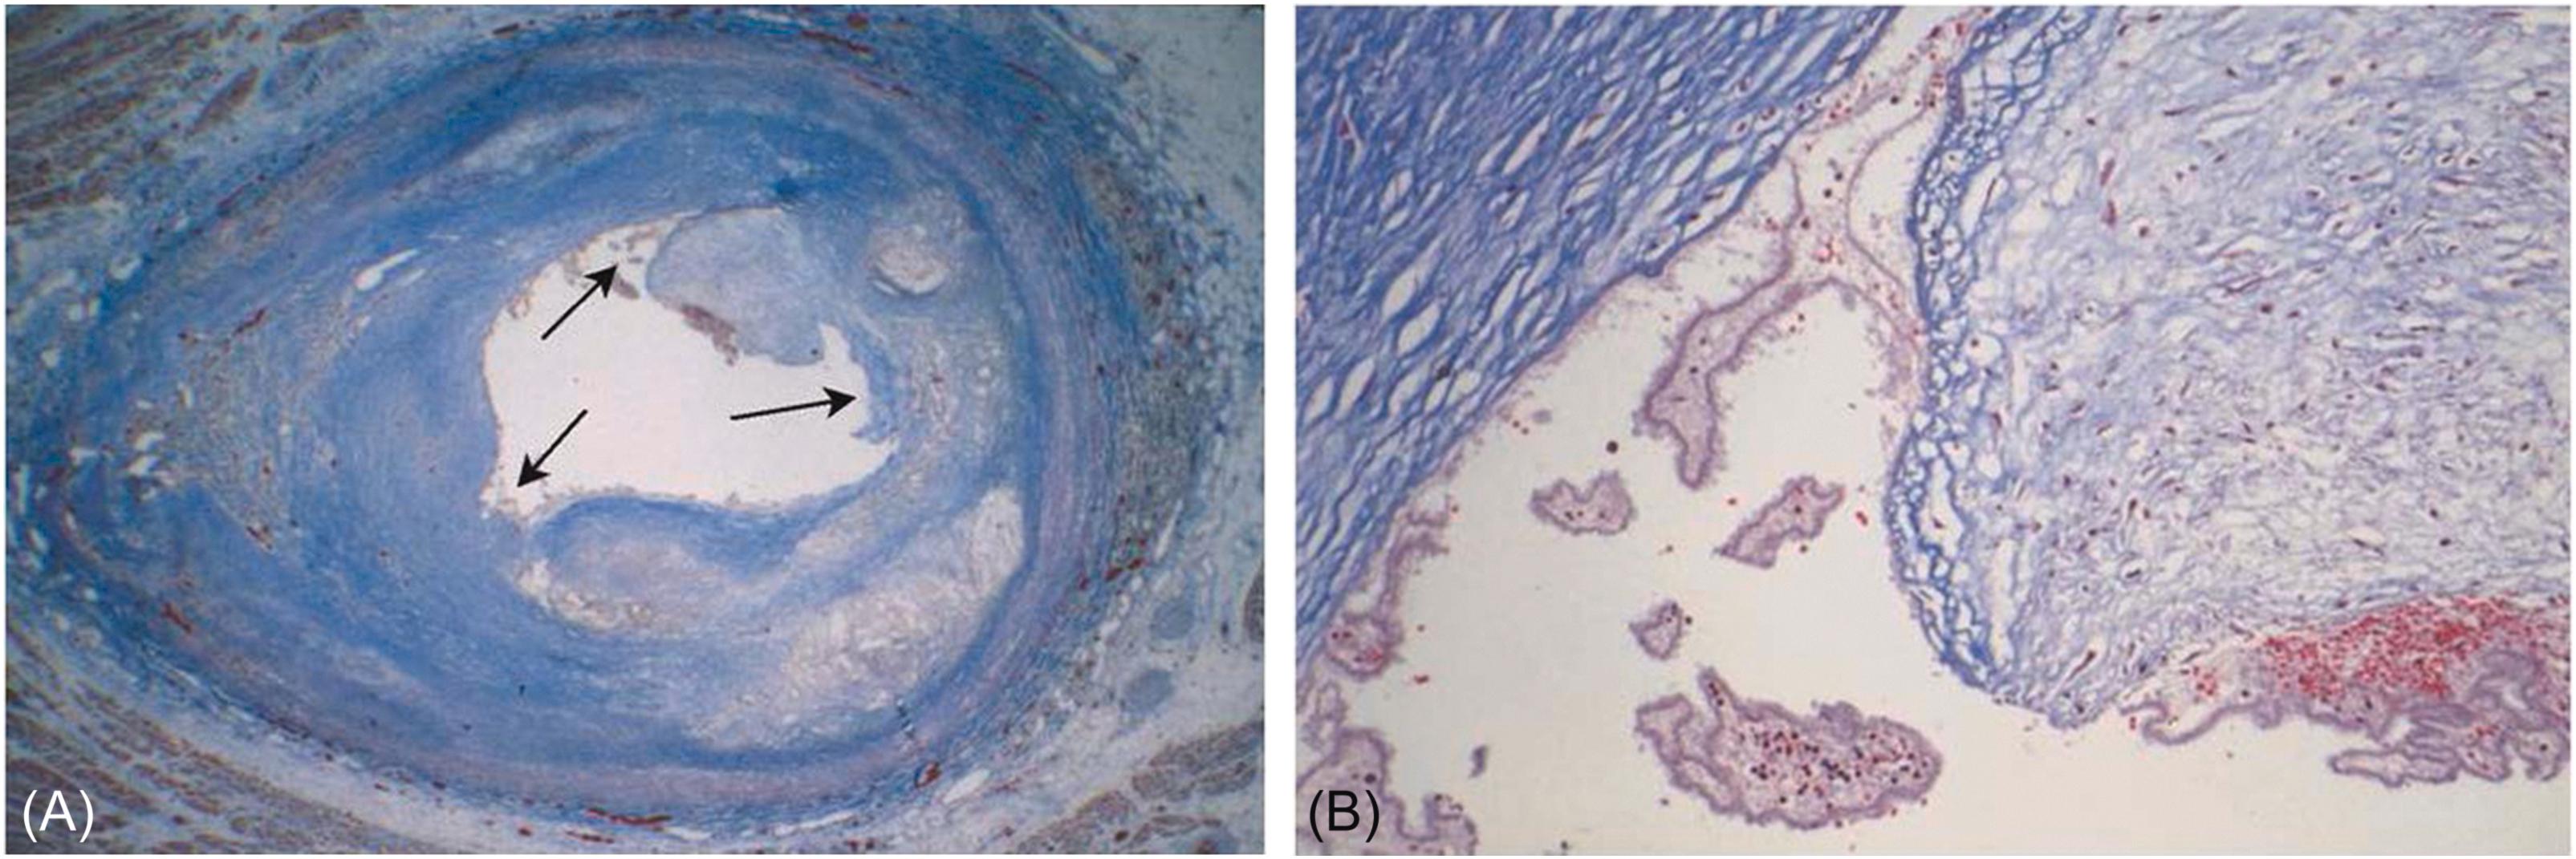 Figure 18.1, Coronary artery after percutaneous transluminal angioplasty (PTCA). (A) ( Left panel ) There are areas of plaque disruption ( arrows ) with microthrombus on the surface. (B) ( Right panel ) Close-up view of the fissured surface of the plaque with attached microthrombus (Trichrome stains).